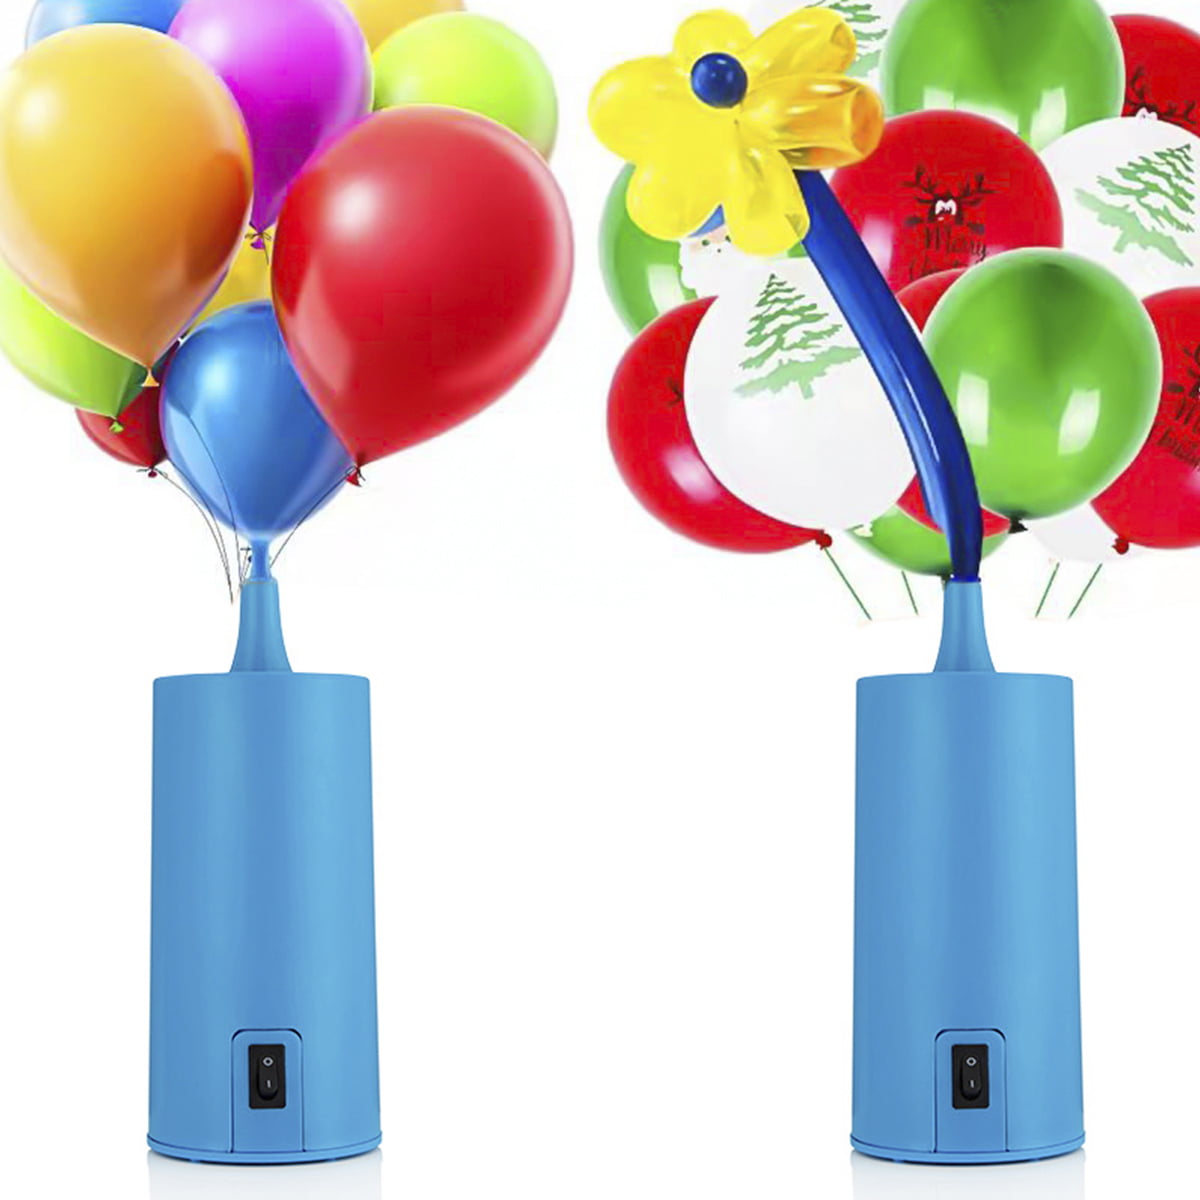 Cozy Greens Balloon Pump Premium Rubber Plastic Handheld Party Air Pump  Balloons&Inflatables 1 Pack